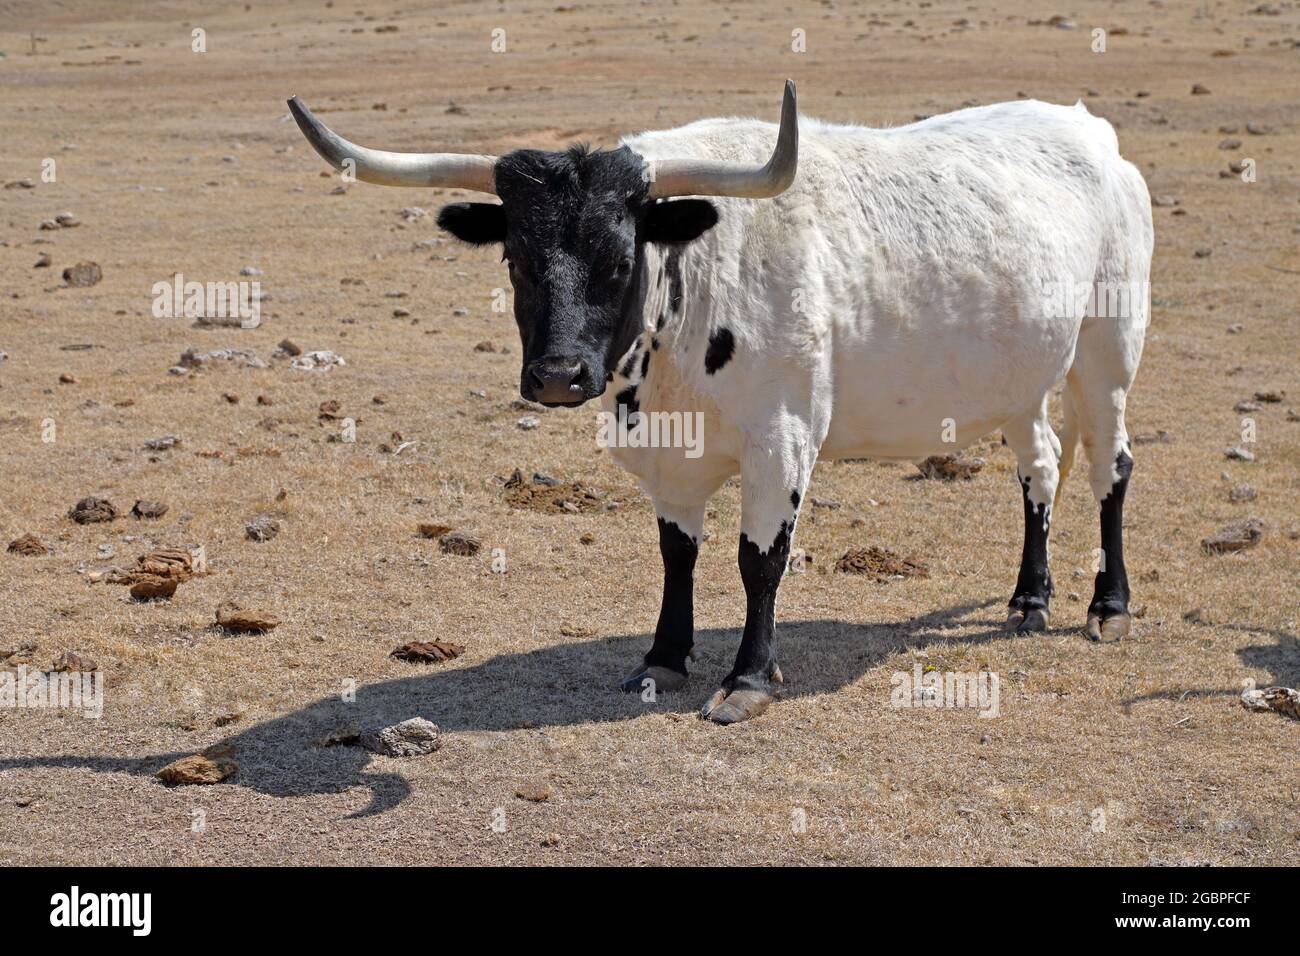 zoology / animals, mammal / mammalian, bovine, (Bos), cattle, (Bos primigenius forma taurus), ADDITIONAL-RIGHTS-CLEARANCE-INFO-NOT-AVAILABLE Stock Photo